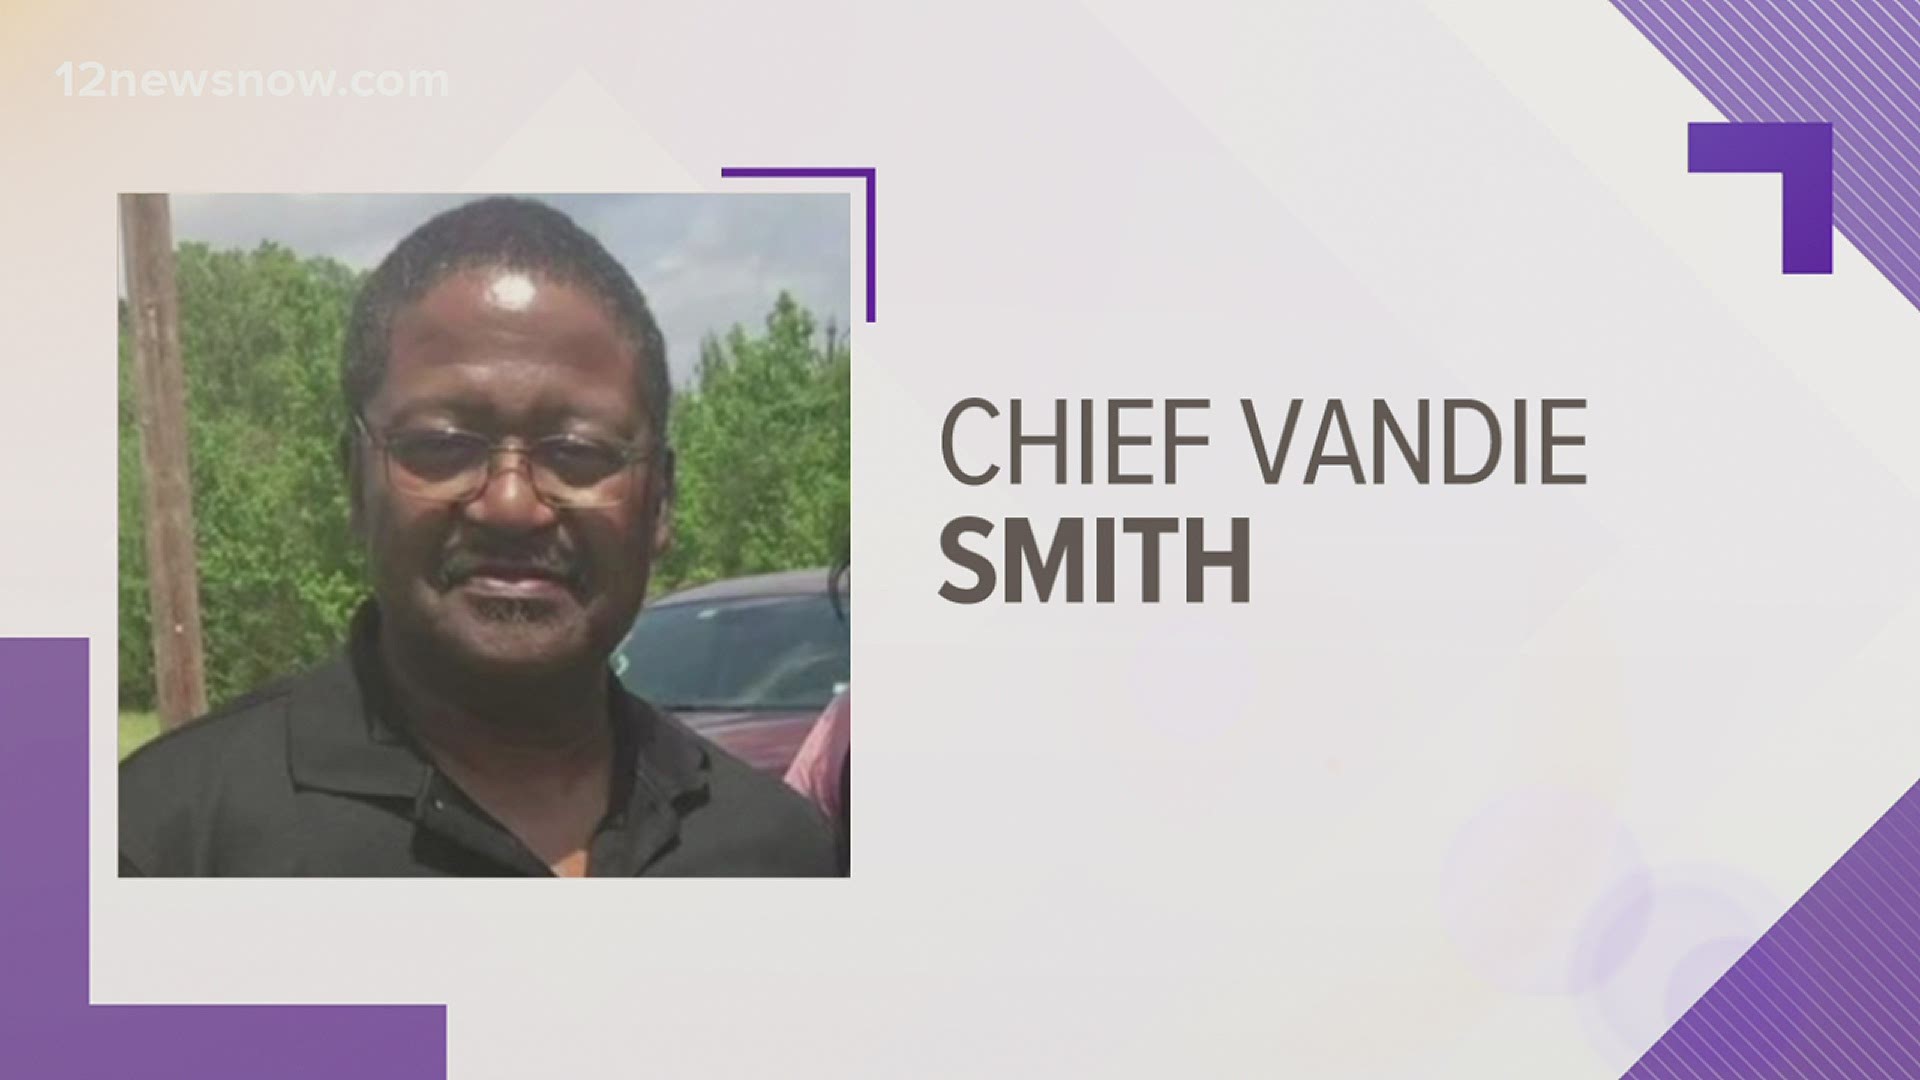 Fire Chief Vandie Smith died Friday, July 2 from underlying health conditions. His funeral will be held Saturday, July 10 at 11 a.m., at the Spring Hill Cemetery.